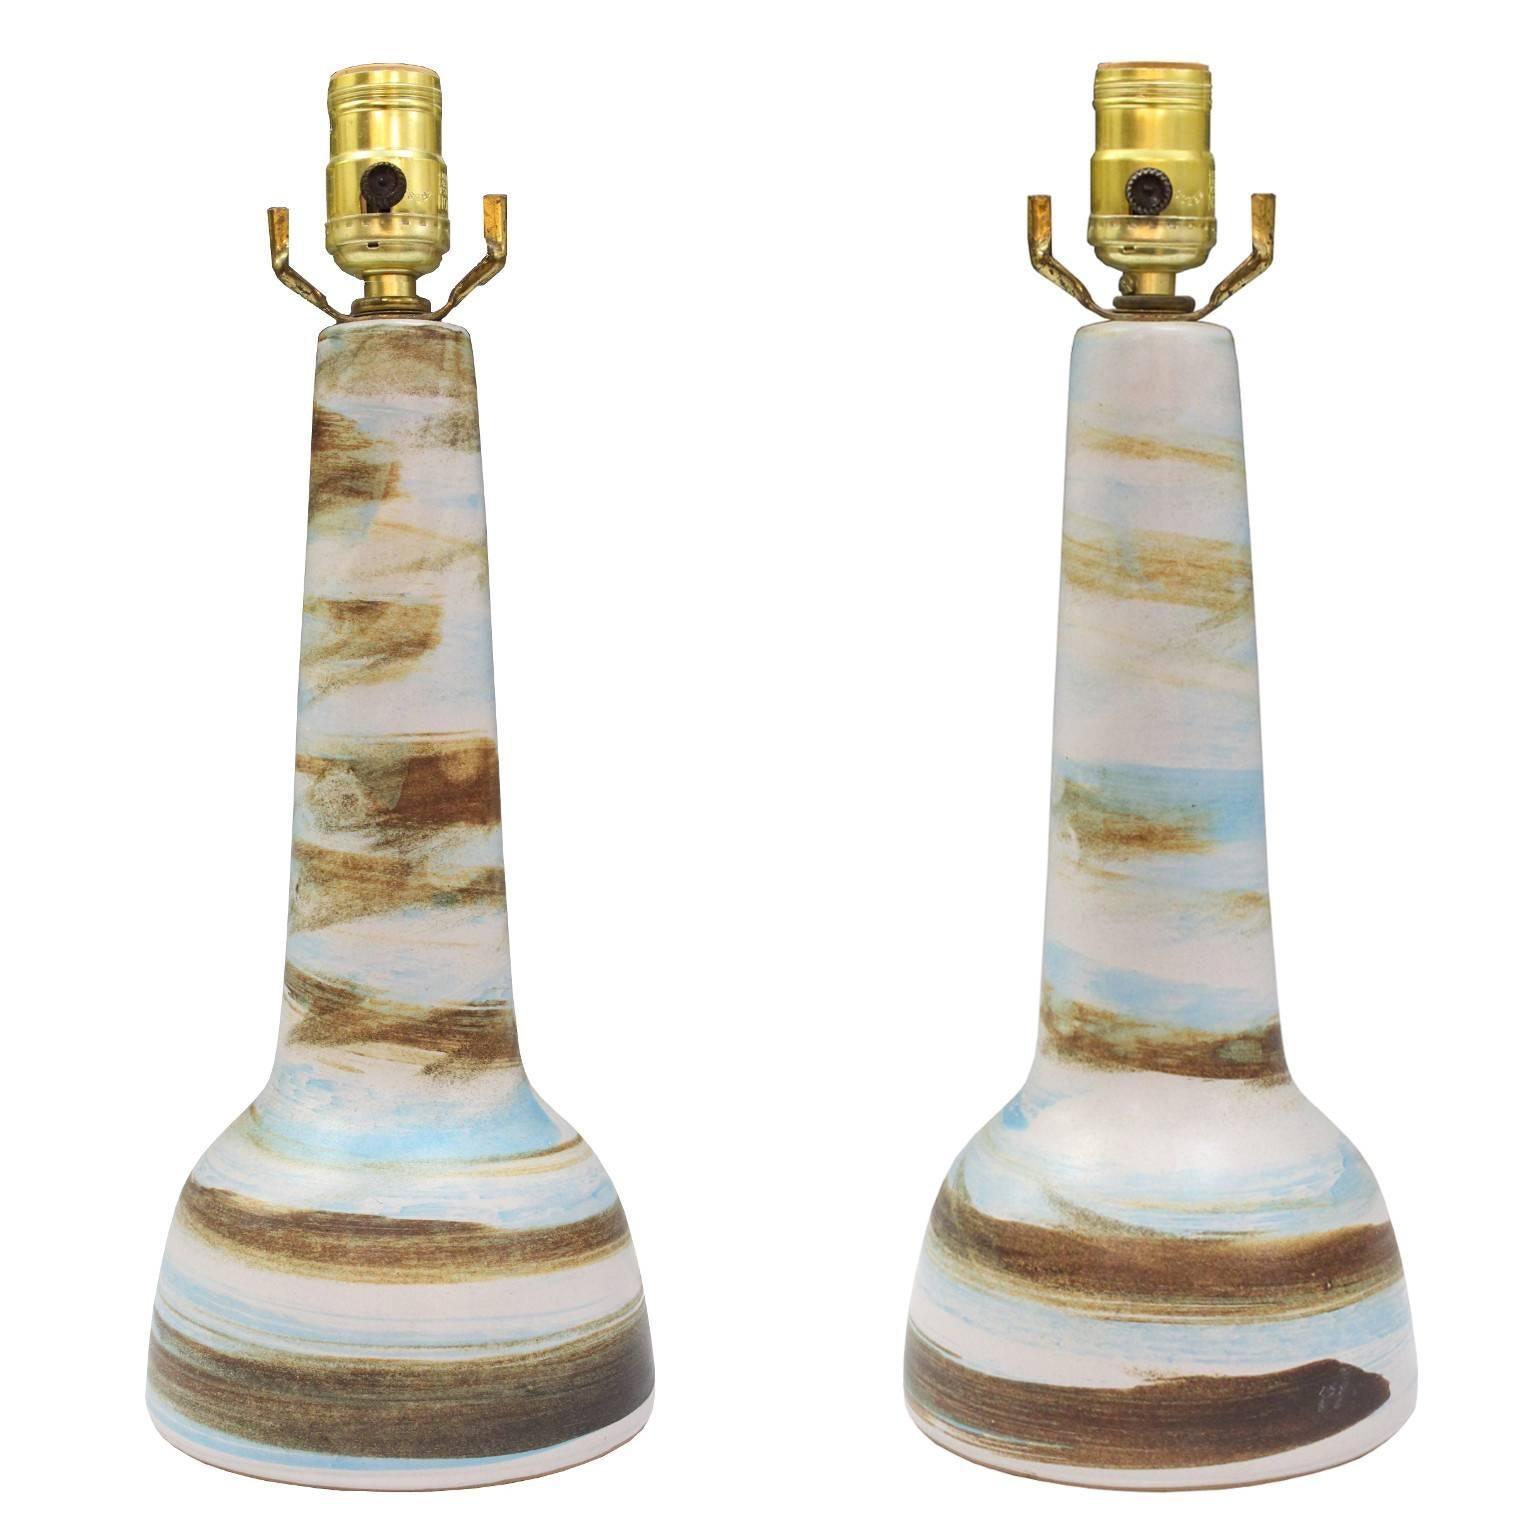 A pair of vintage table lamps, by ceramicist Gordon Martz  for Marshall Studios circa 1950s, each with single sockets over baluster form ceramic bodies, with matte glazed in swirling tones of blue, brown and cream. Markings include artist's